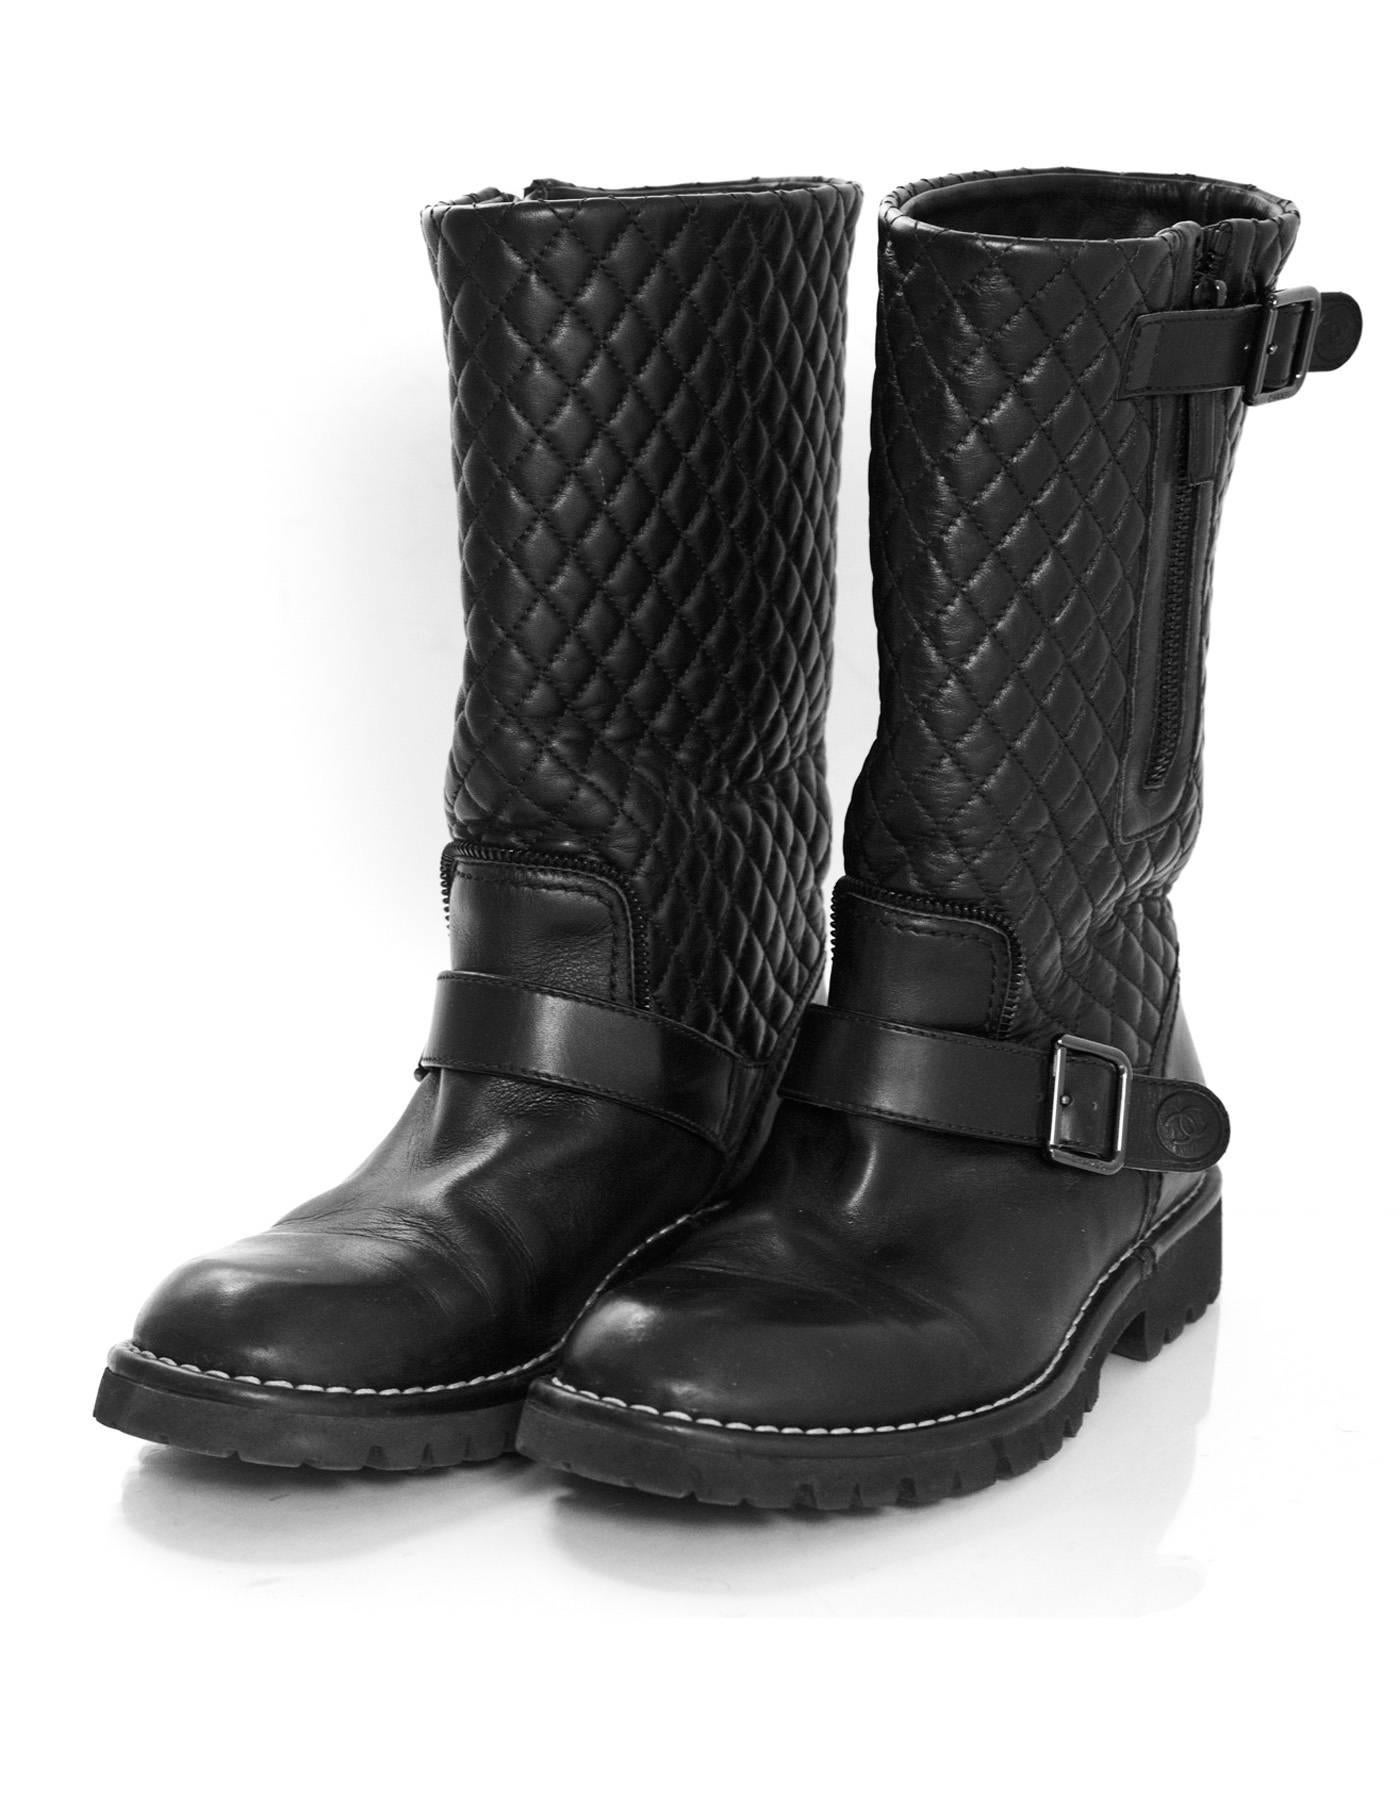 Chanel Black Quilted Leather Biker Boots Sz 38.5

Made In: Italy
Color: Black
Materials: Leather
Closure/Opening: Side zip closure
Sole Stamp: Chanel Made in Italy
Overall Condition: Excellent pre-owned condition with the exception of some creasing